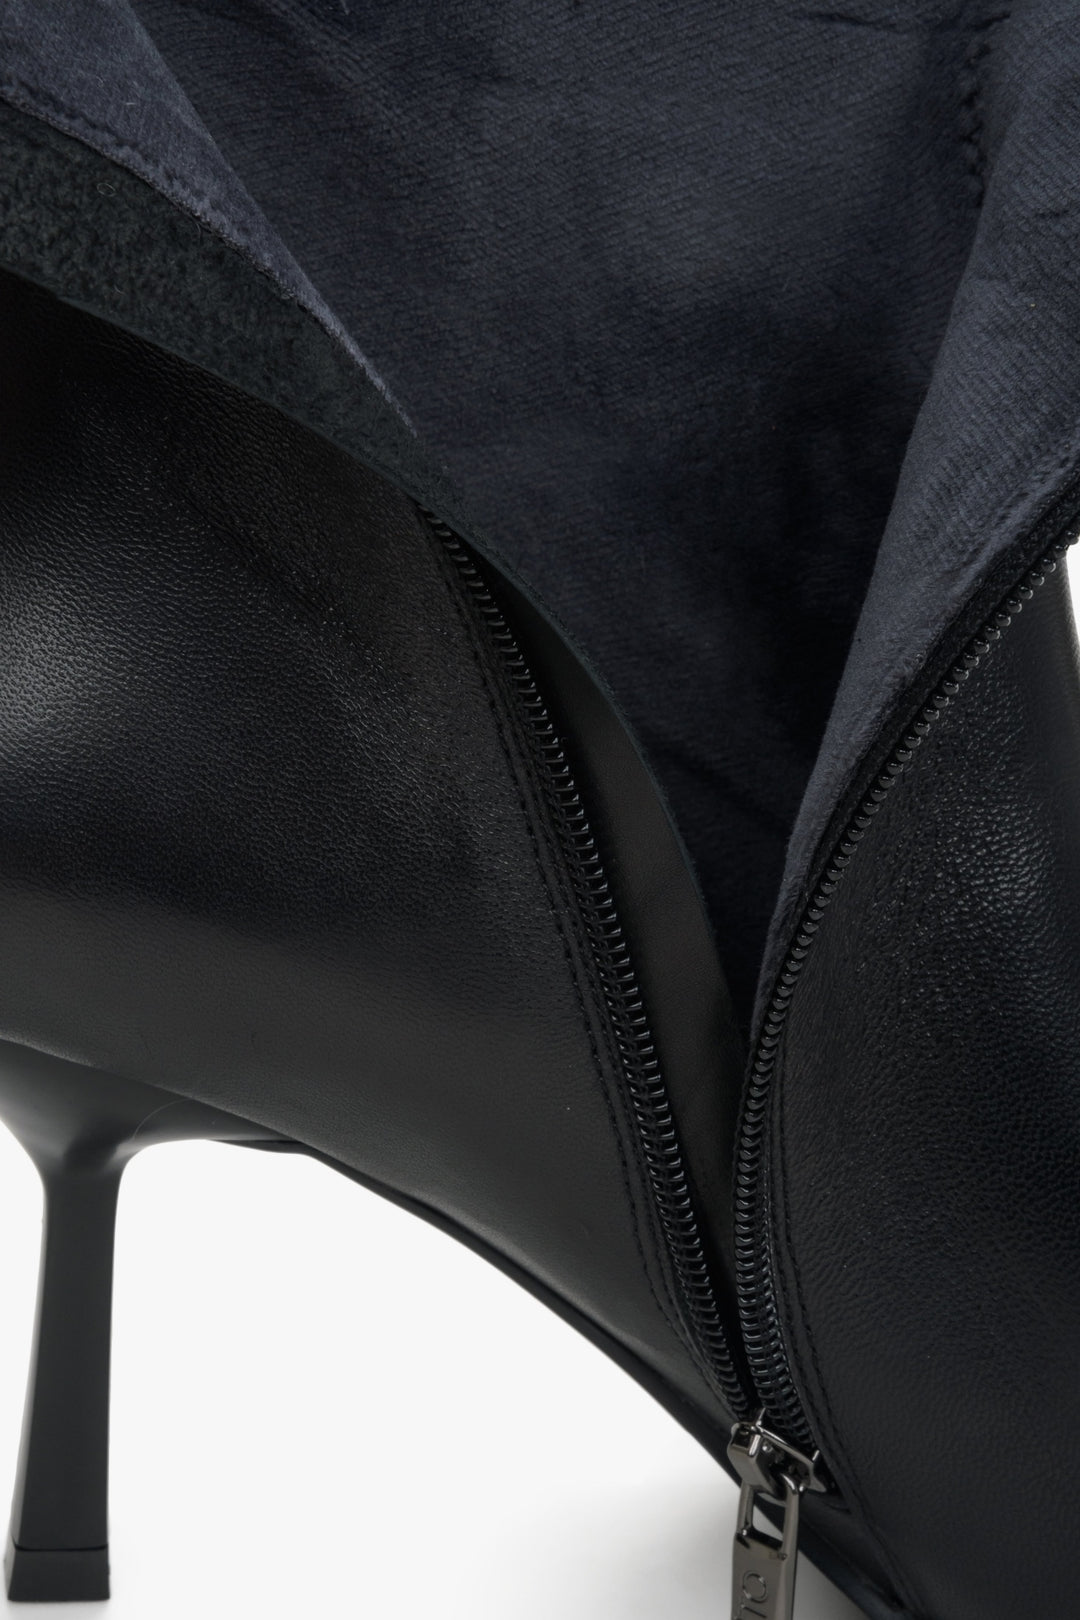 Women's black leather boots with a heel made of genuine leather by Estro - close-up on the inside of the shoe.